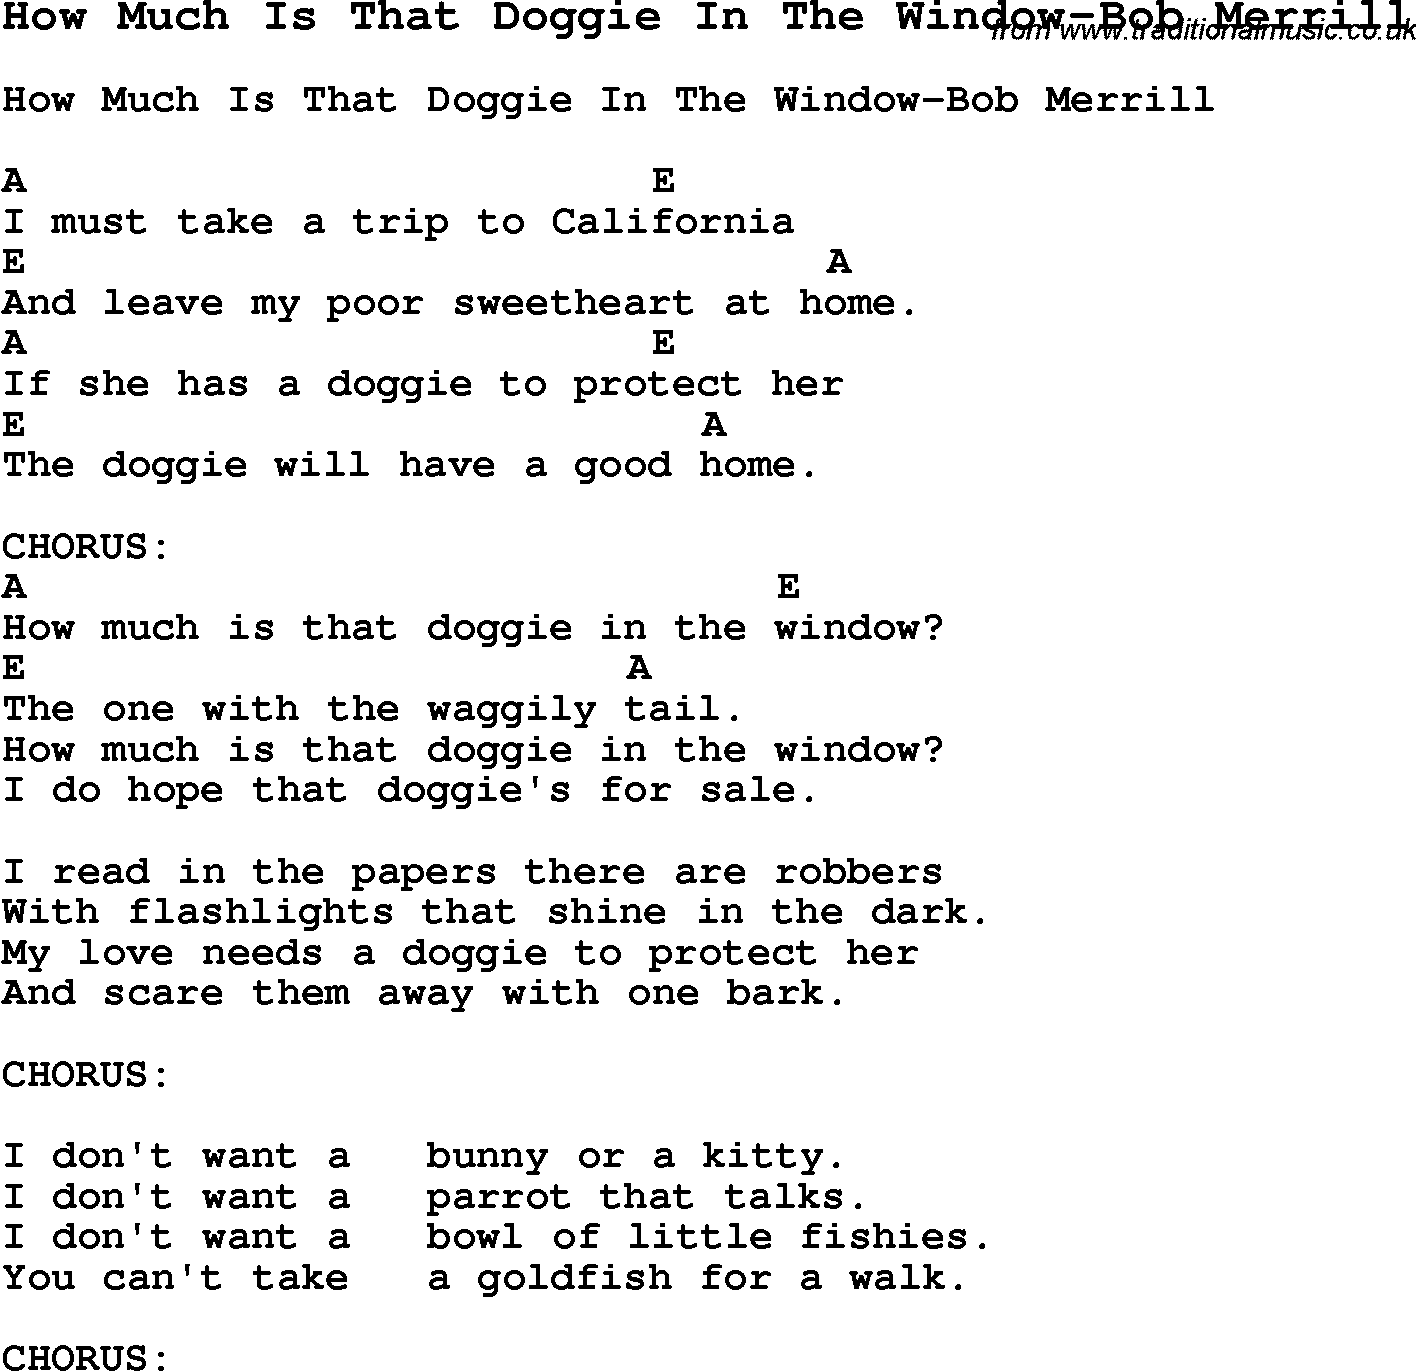 Summer-Camp Song, How Much Is That Doggie In The Window-Bob Merrill, with lyrics and chords for Ukulele, Guitar Banjo etc.